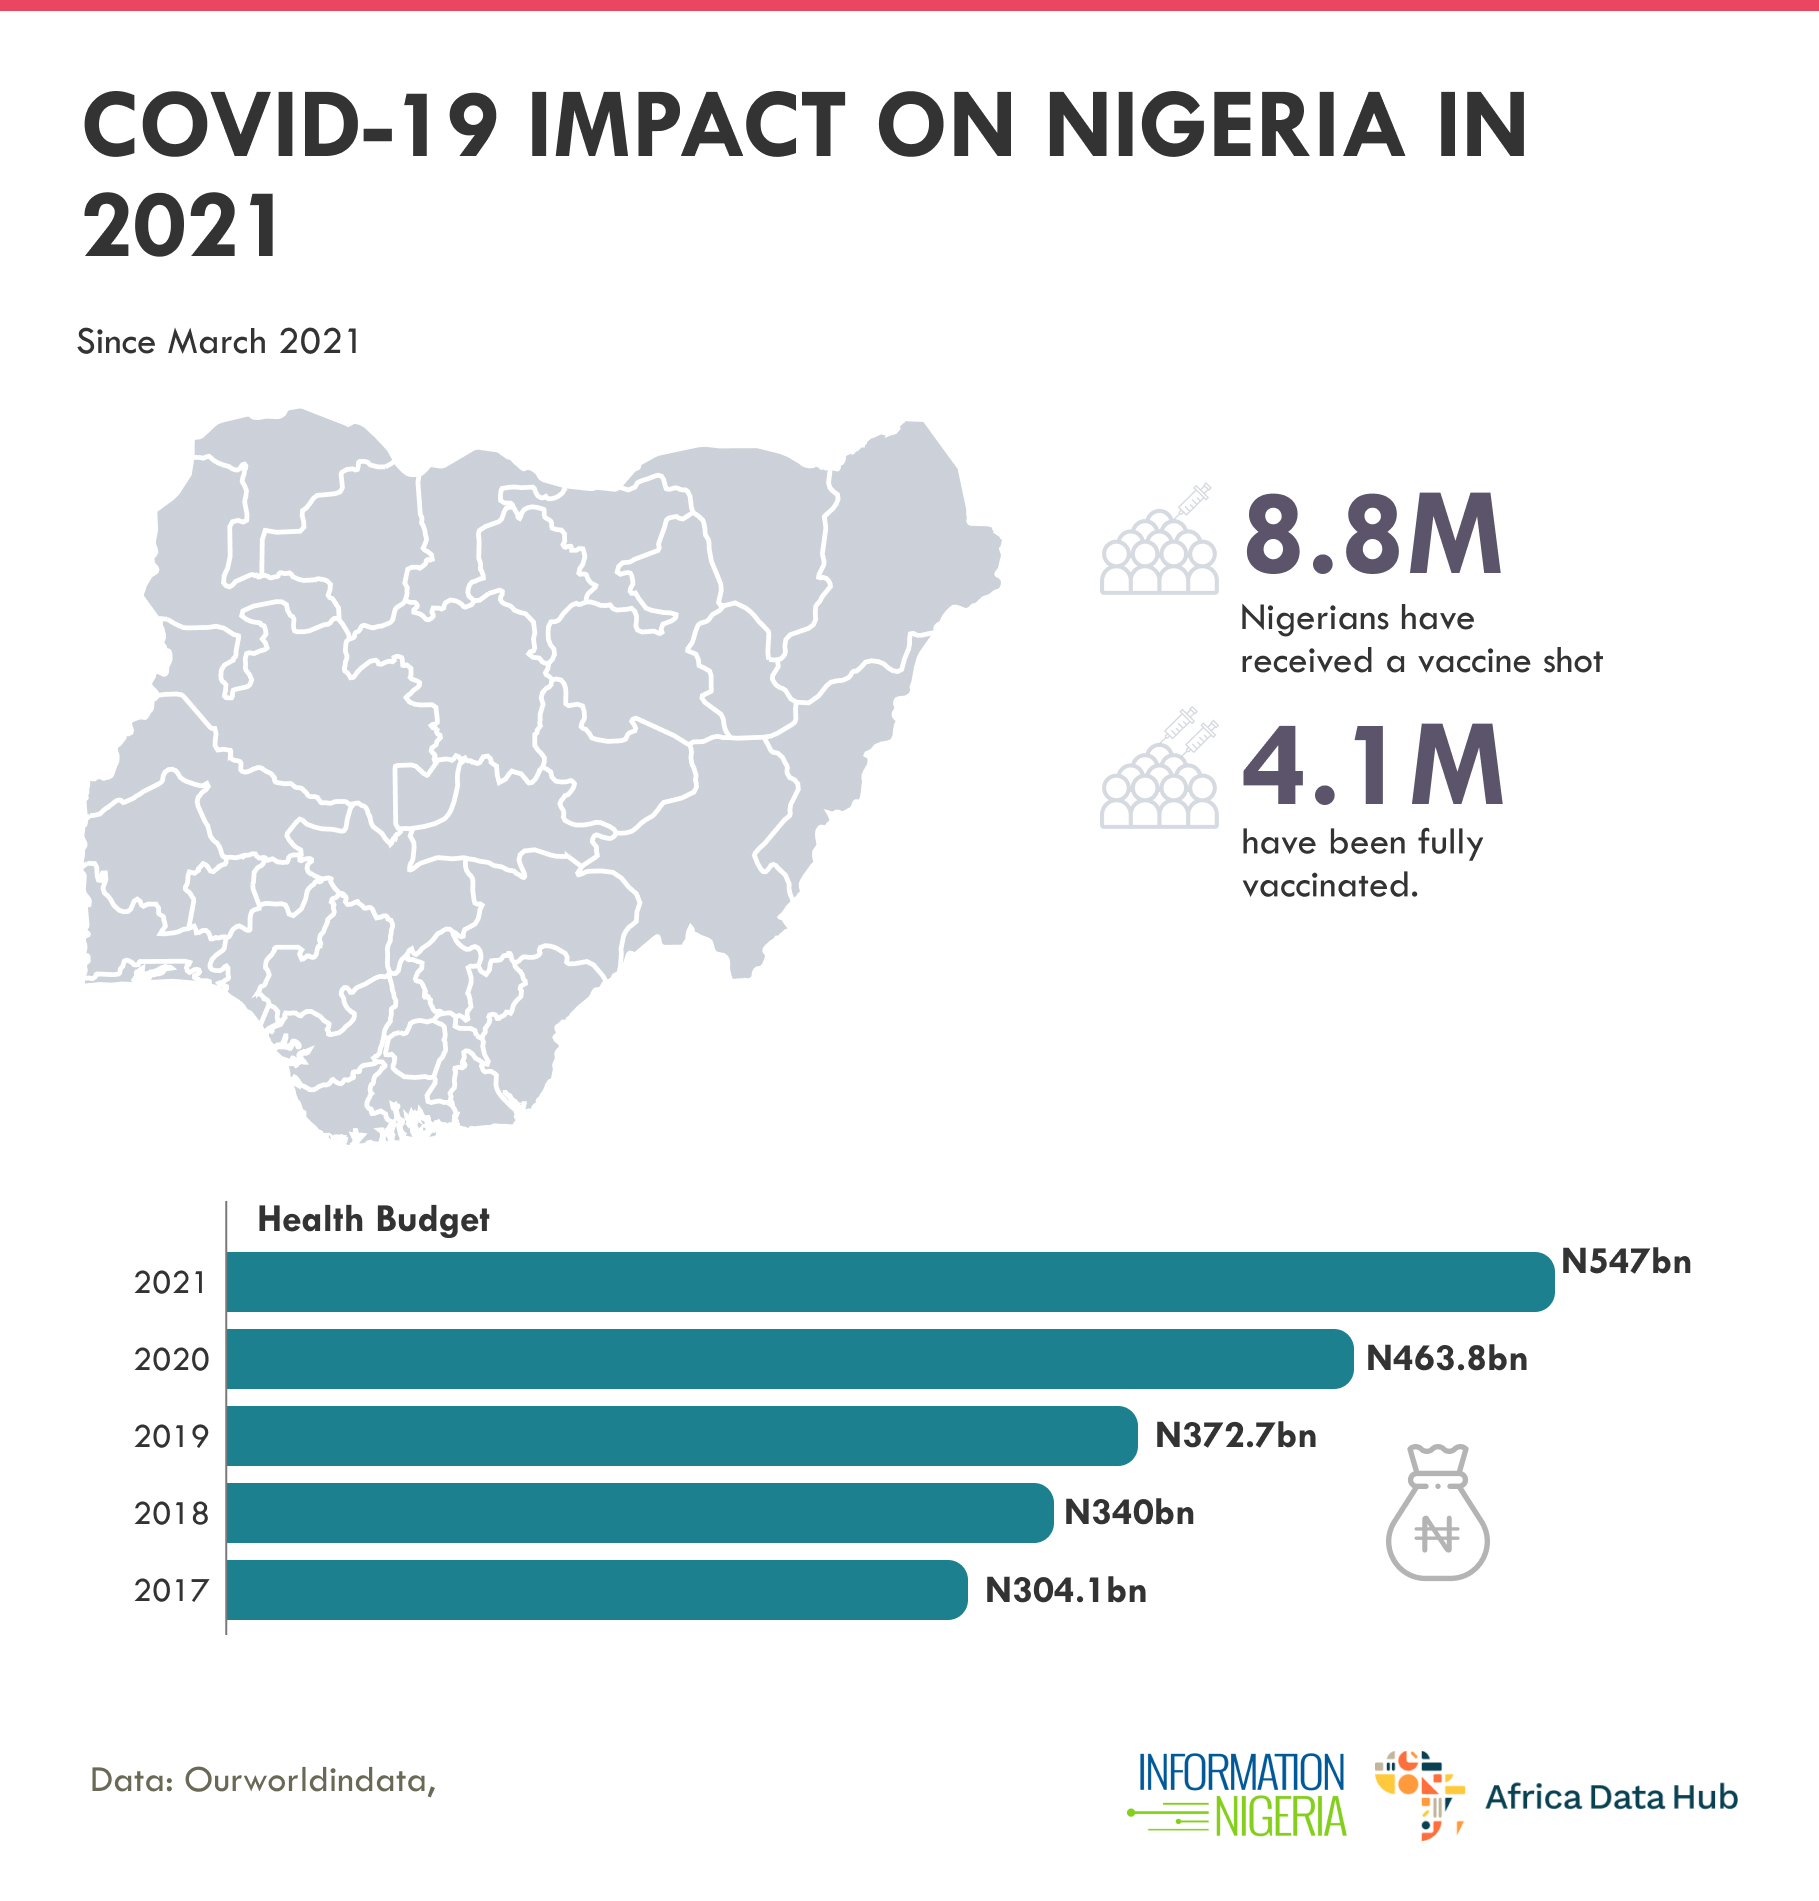 As the year draws to a close, it is critical to assess the impact of the COVID-19 pandemic on the country, as the virus appears to be here to stay, as indicated by the recent discovery of new strains and the announcement of a fourth wave. The virus's spread Throughout the year, Nigeria saw an increase in the number of COVID cases, which appeared to be threatening to overwhelm the country's already overburdened health systems. In the year that the world experienced the outbreak, Nigeria registered 88,719 cases of the virus based on the statistics available at the start of the year, 2021. Nigeria, on the other hand, had documented around 227,000 cases of the virus as of the time of posting this article. In other words, in the year since the country began immunizing its residents, the country has seen an increase in the number of cases by recording approximately 138000 cases which represent approximately 61% of the cases in the country. Vaccination Since the vaccination campaign began in March 2021, the country has obtained vaccines from a variety of pharmaceutical corporations, including Pfizer, Moderna, Johnson & Johnson, and AstraZeneca. Approximately 8.8 million Nigerians have received a vaccine shot, representing 4.3 percent of the total population, while approximately 4.1 million have been fully vaccinated, or 2.0 percent of the whole population, as of the time of filing this report. Budget The overall national budget in 2017 was N7.4 trillion. The health sector received N304.1 billion, or 4% of the total. The national budget for 2018 was N8.6 trillion, with the health sector receiving N340 billion, or 3.9 percent of the total. Even as the country strives to combat the pandemic, the budget remains low in 2019, 2020, and 2021. In 2019, the health sector was budgeted for 372.7 billion, accounting for 4.18 percent of the total budget; in 2020, the health budget of 463.8 billion represented a meager 4.16 percent of the total budget; and in 2021, the health sector was budgeted for 547 billion, accounting for 7% of the total budget. A total of N45.81 billion was earmarked for COVID-19 interventions in the 2022 budget proposal. The sum, primarily from the health capital budget, accounts for around 23.54 percent of the total capital budget for health and 5.6 percent of the overall health budget of $816.15 billion, or 4.8 percent of the anticipated budget of $17 trillion. Economy COVID-19 has continued to have an economic influence on the country's export and import volumes. Nigeria's total commodity terms of trade (ToT) fell by 2.85 percent in the third quarter of 2021 (Q3'21), despite a 2.3 percent drop in commodity exports. This is the third consecutive quarterly fall in commodity ToT, and the largest so far this year. In Q1 of this year, commodity ToT fell by 0.51 percent, and in Q2 of this year, it fell by 0.35 percent. When the terms of trade improve between two periods (or when TOT exceeds 100 percent), the value of exports rises compared to the value of imports, allowing the country to buy more imports for the same amount of exports. COVID-19 has affected the finances of many countries of the world including Nigeria’s trade partners, thereby affecting their purchasing power. This factor coupled with insecurity and the drive towards environmental sustainability has occasioned this development. Unemployment rate Nigeria's unemployment rate has continued to climb as a result of the pandemic. Currently, 35.2 percent of the working-age population is unemployed. This is the highest level in the last five years. 